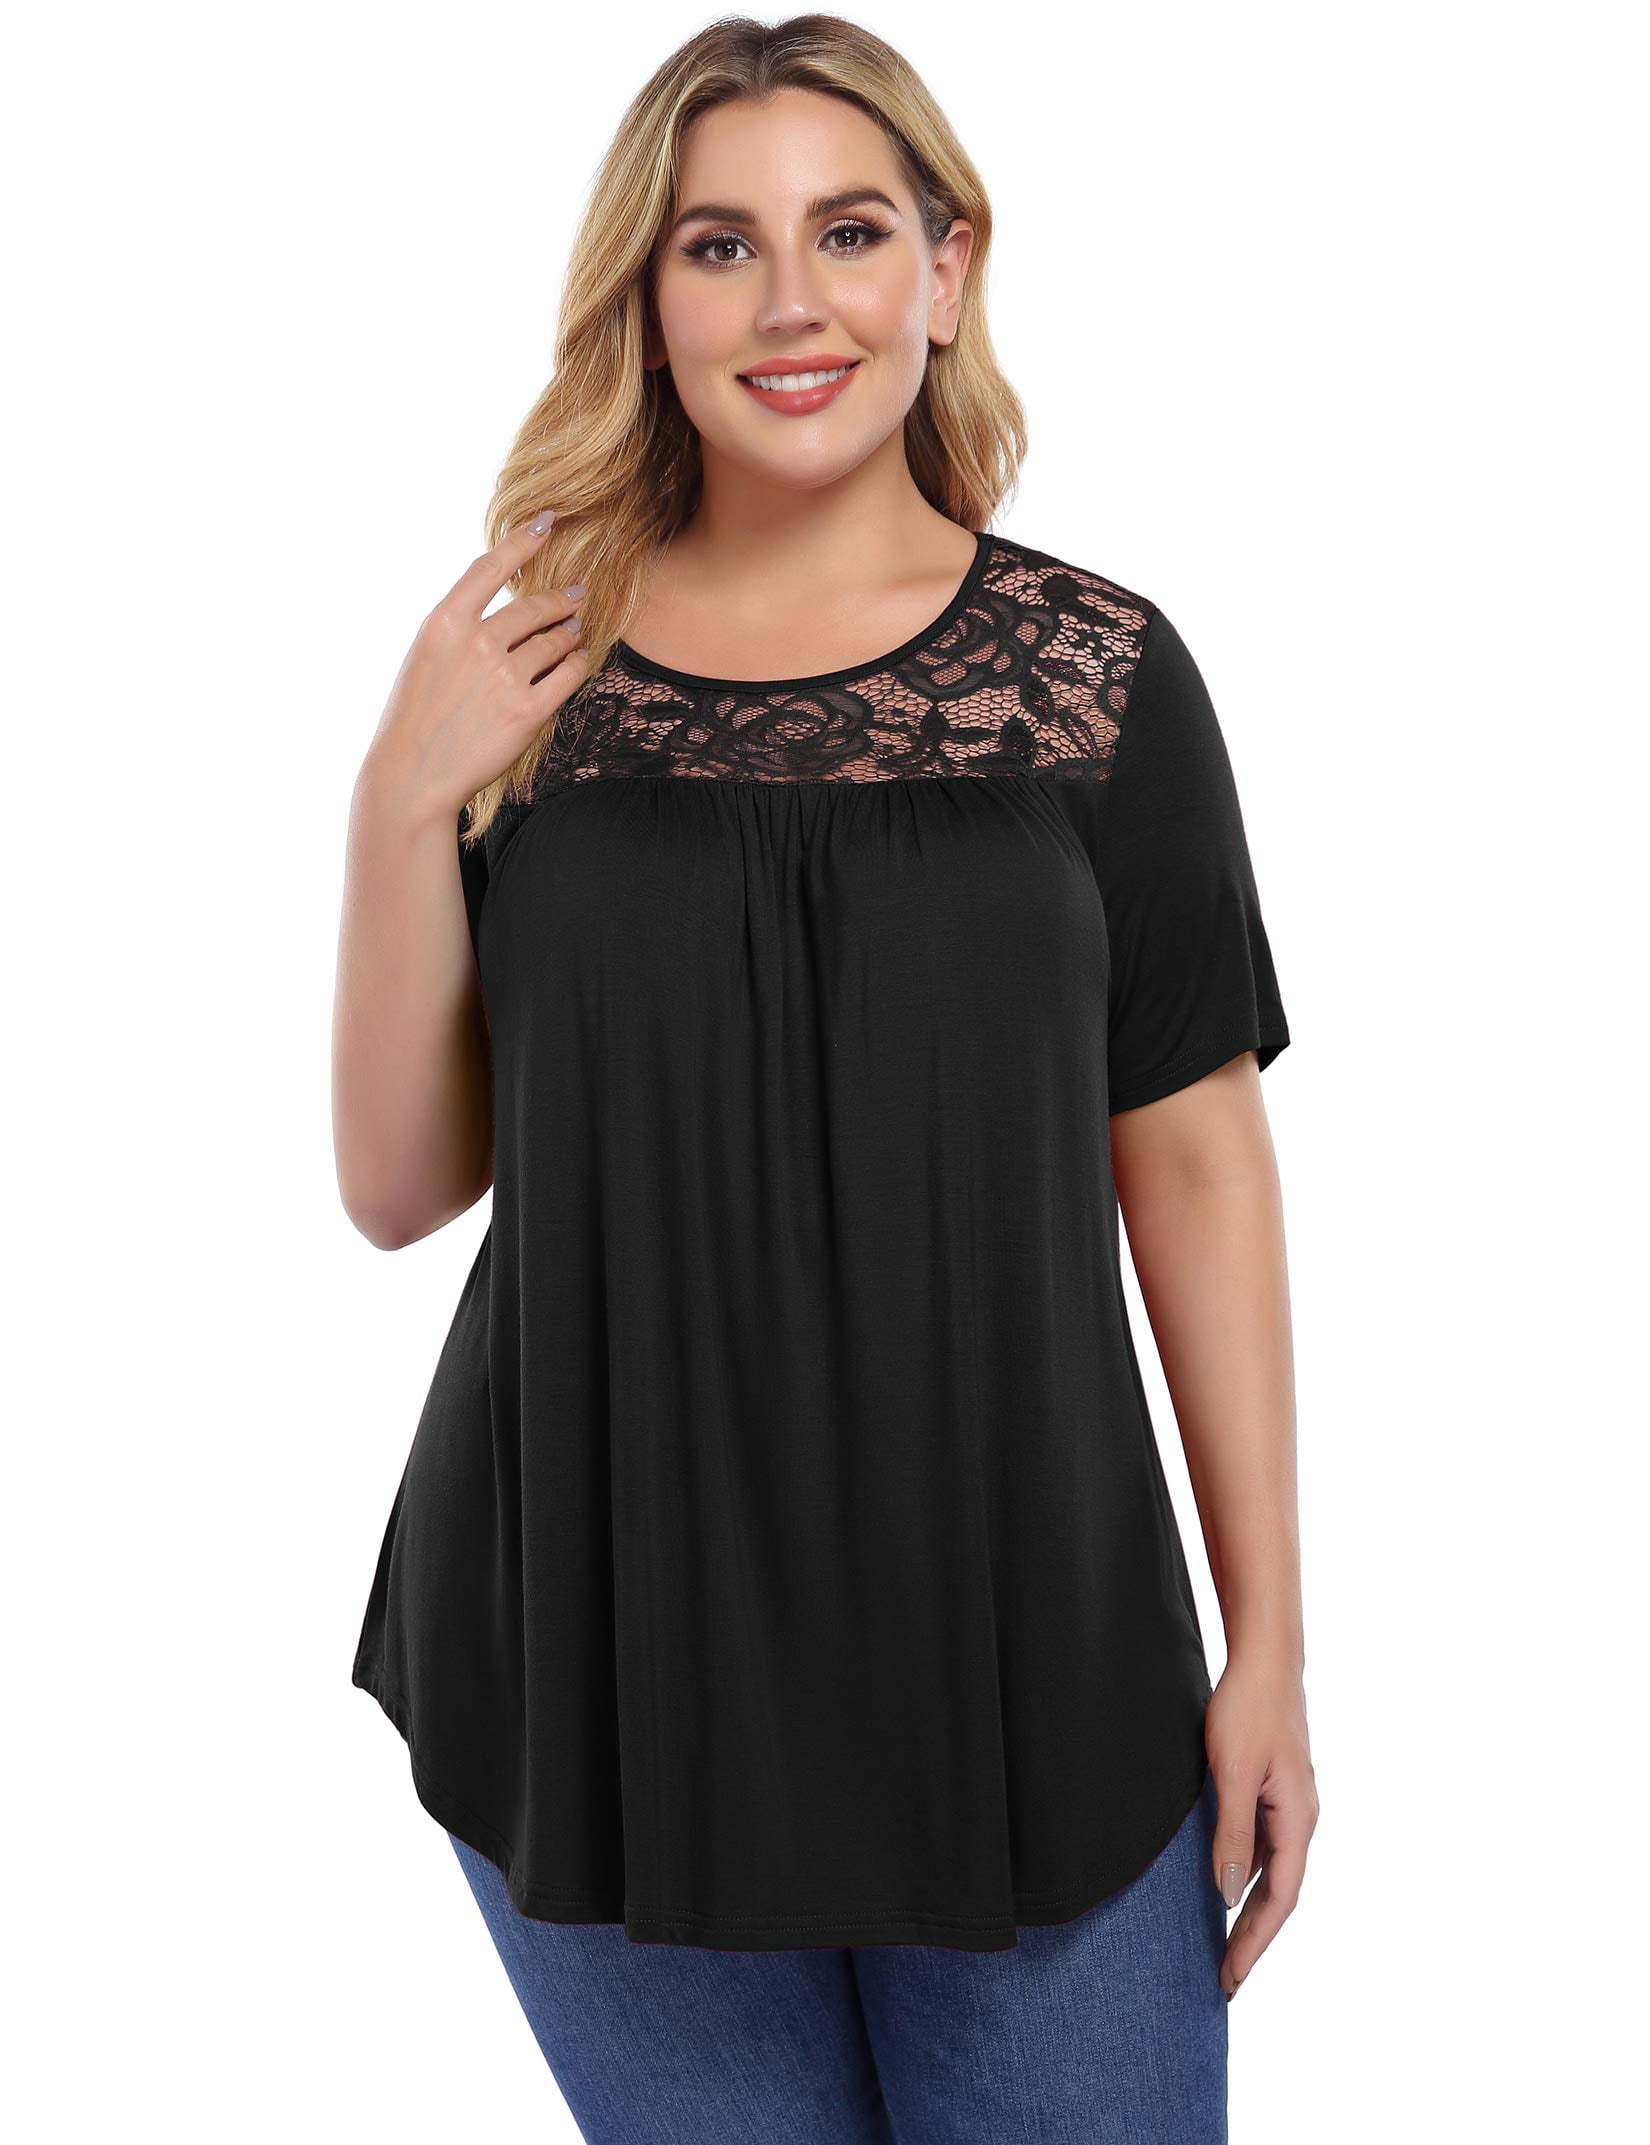 Women's Plus Size Summer Tops Short Sleeve Lace Pleated T-Shirts ...